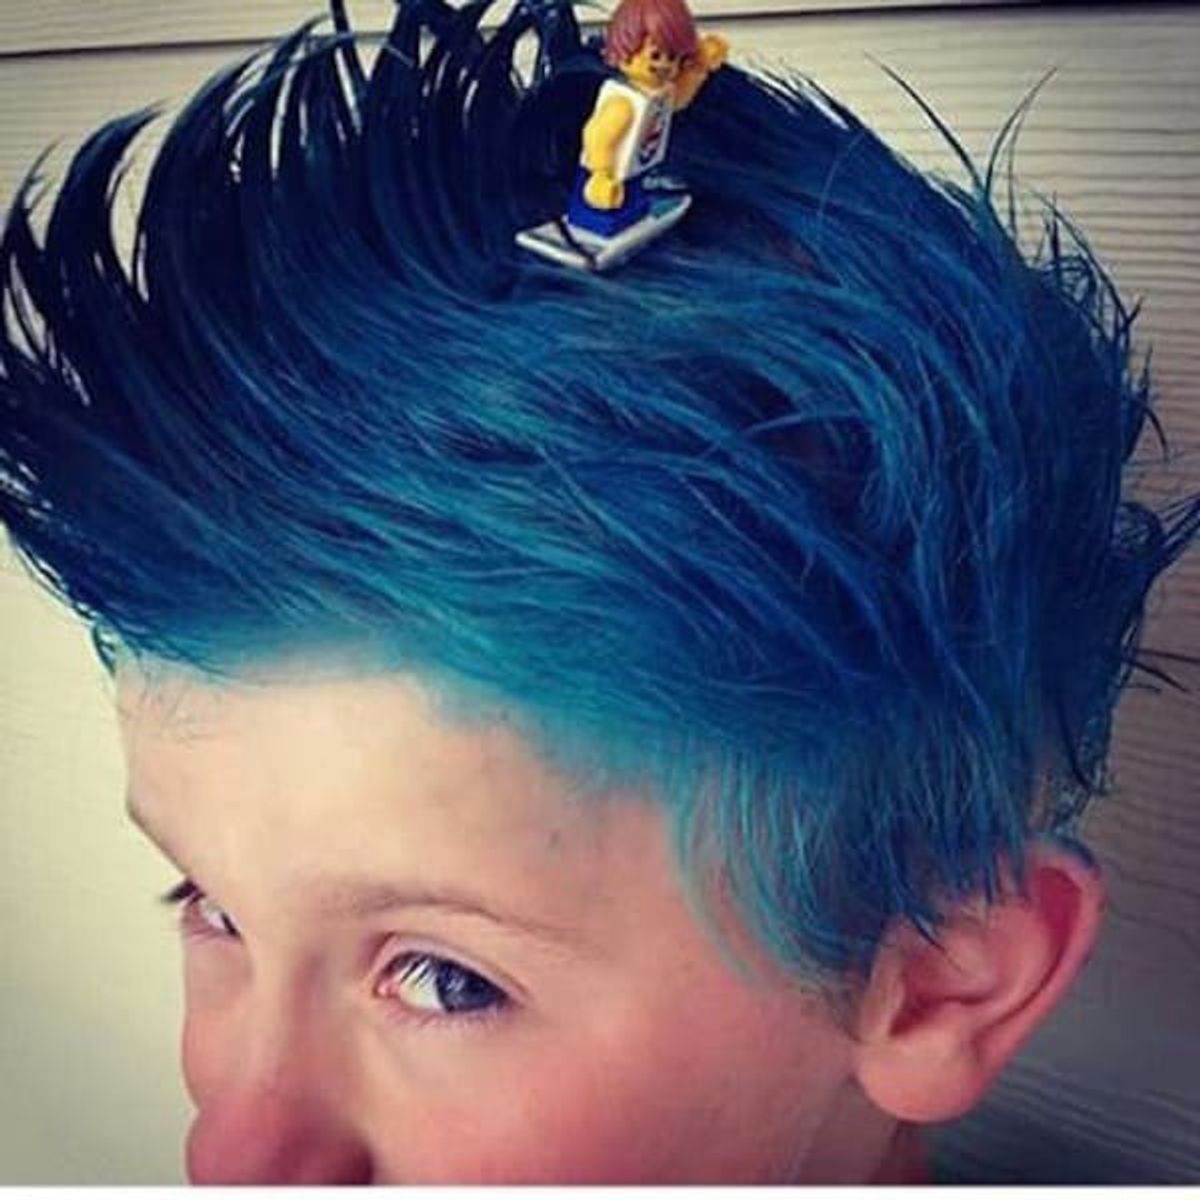 9 of the Craziest Hairstyles Ever